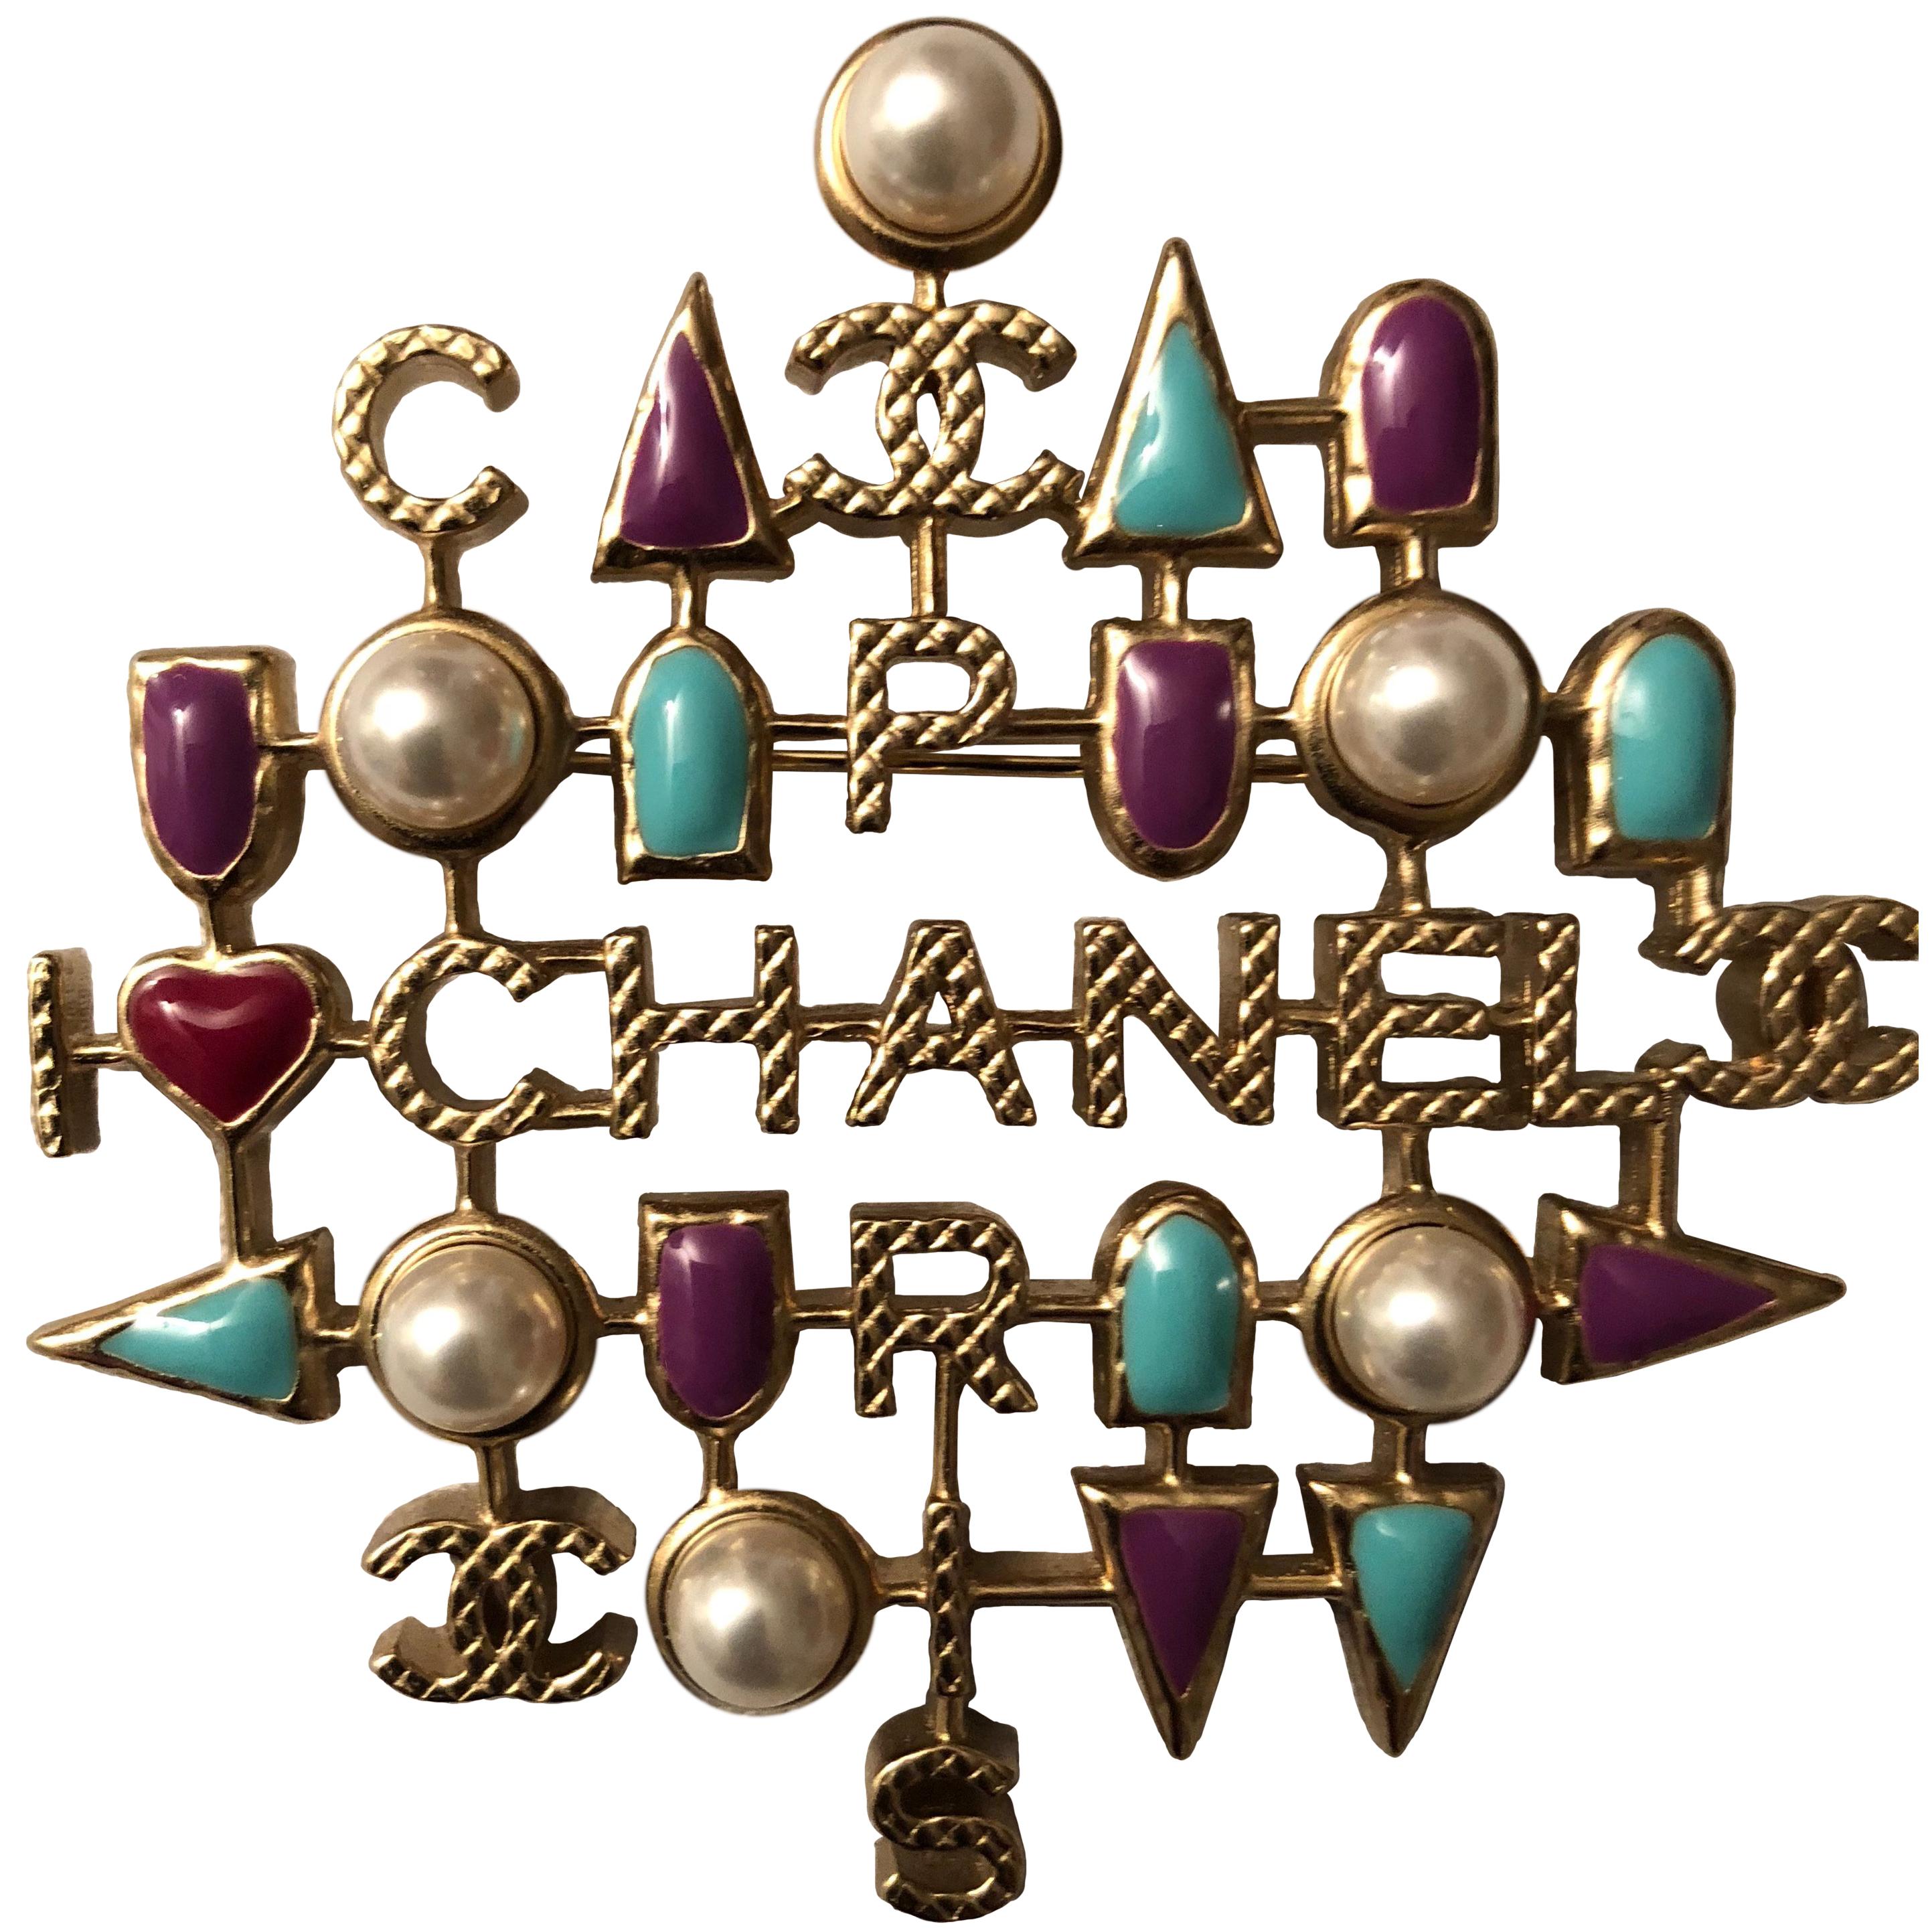 Presented here is a beautiful new pin from Chanel 2017 Spring collection. The pin measures 2.5 inches wide at the longest point where CHANEL is written out and2.5 inches high. It is a beautiful gold tone and is signed on the back. Please look at the